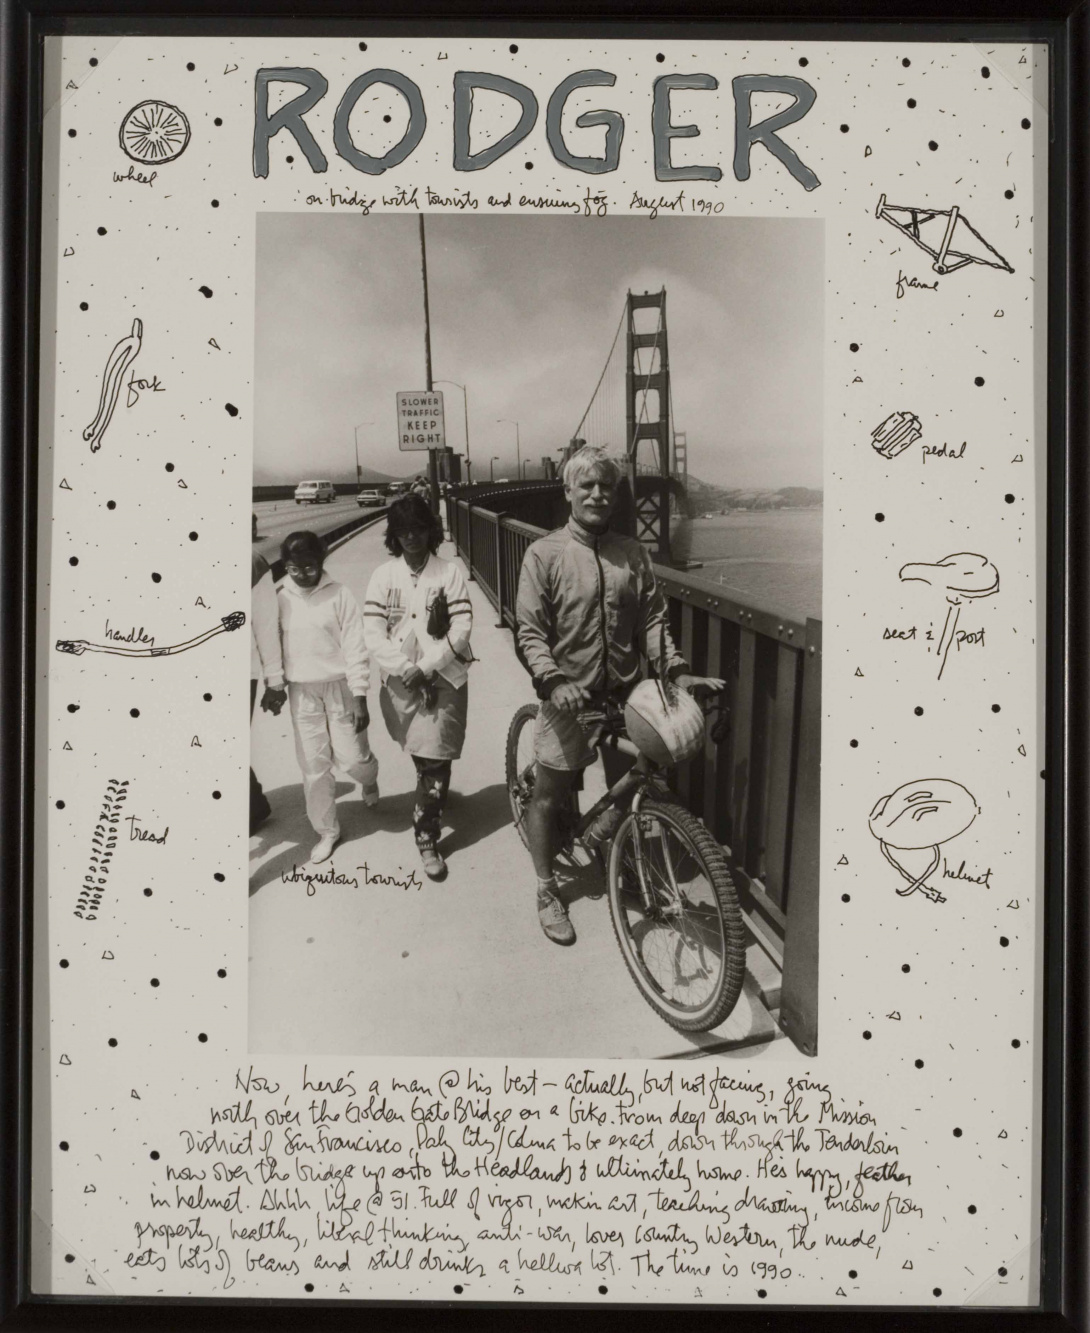 A framed black and white photograph of a man and his family with bicycles on the Golden Gate bridge. The mat surrounding the photo has hand-drawn abstract bike parts, a description at the bottom, and Rodger's name written in big letters at the top.